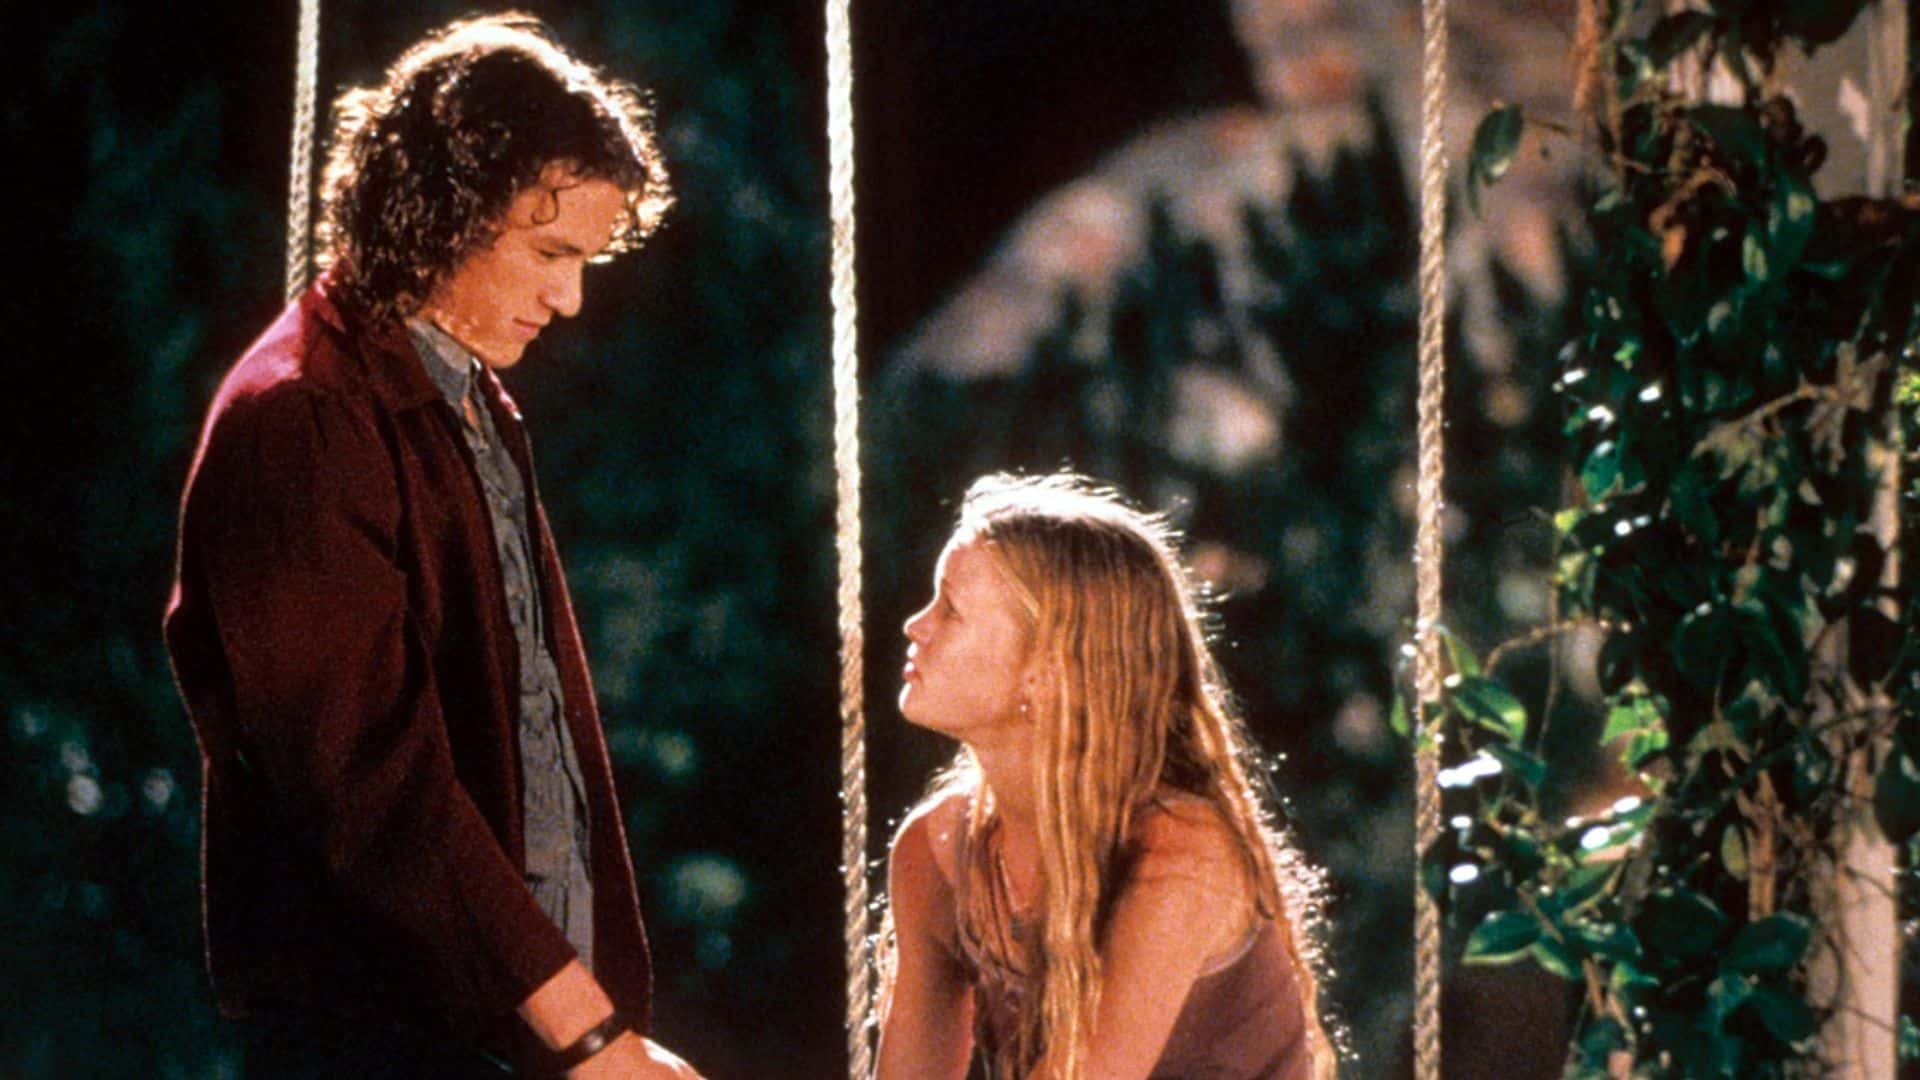 Heath Ledger stands next to Julia Stiles sitting on a swing in this image from Touchstone Pictures.